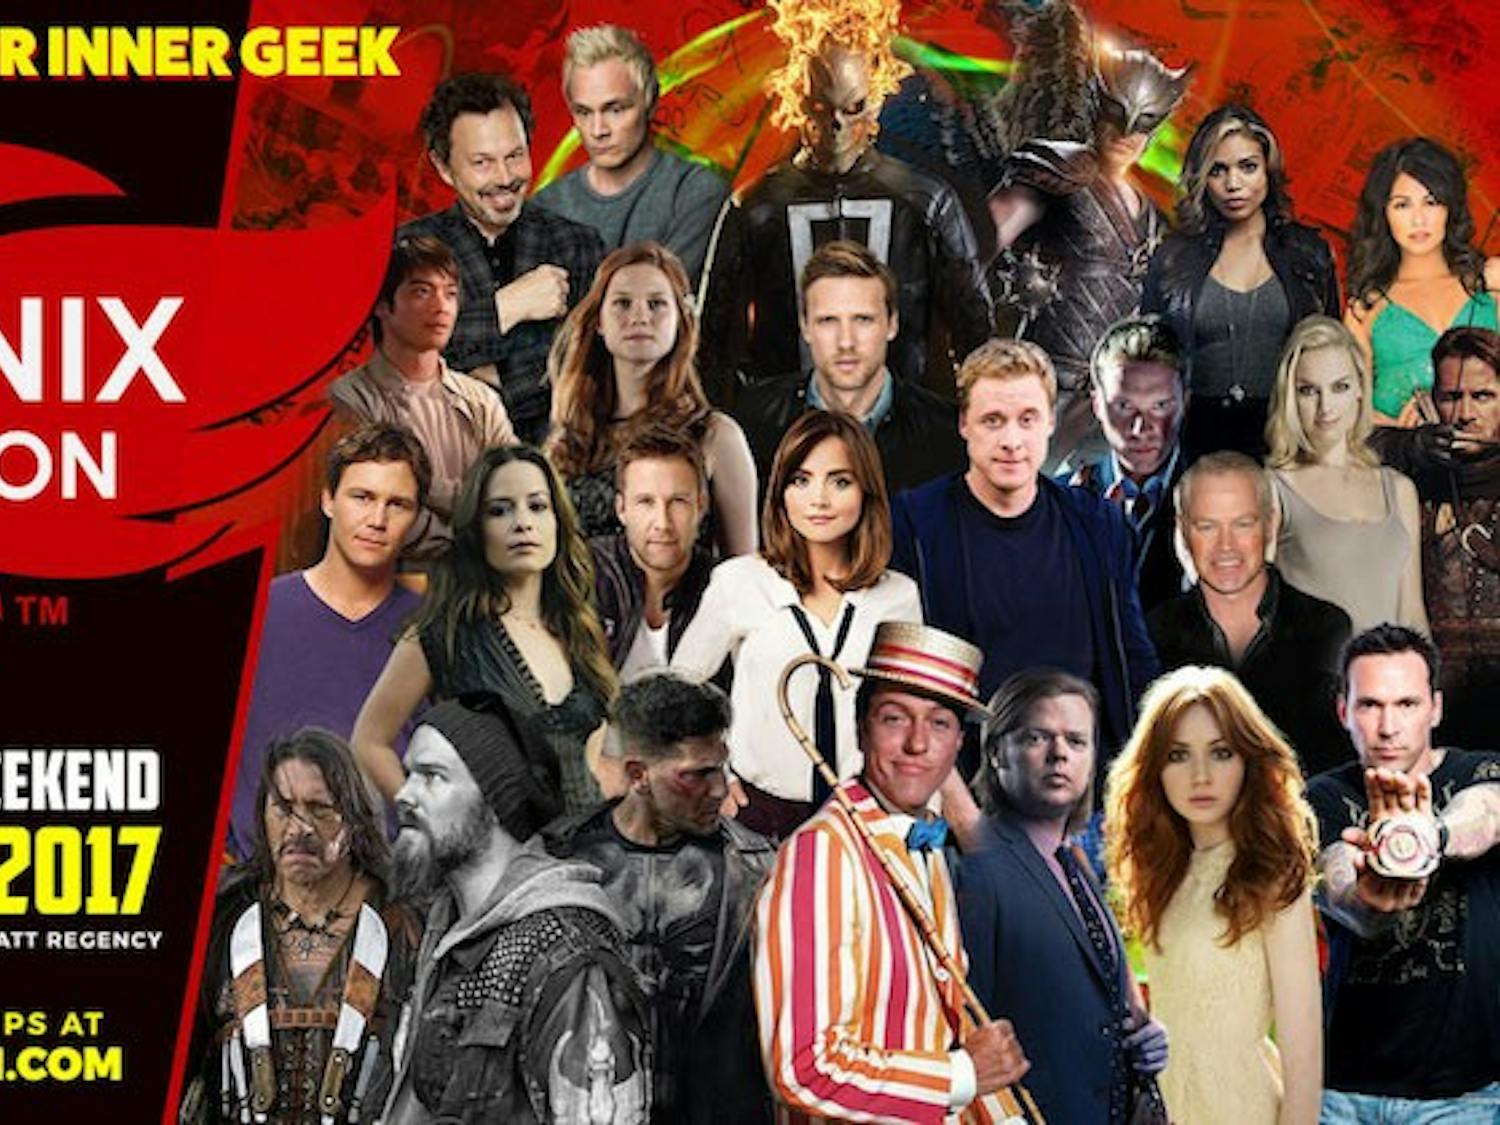 An infographic for Phoenix Comicon 2017, featuring movie stars, comic creators, voice actors and more. The event will take place this Thursday through Sunday at the Phoenix Convention Center.